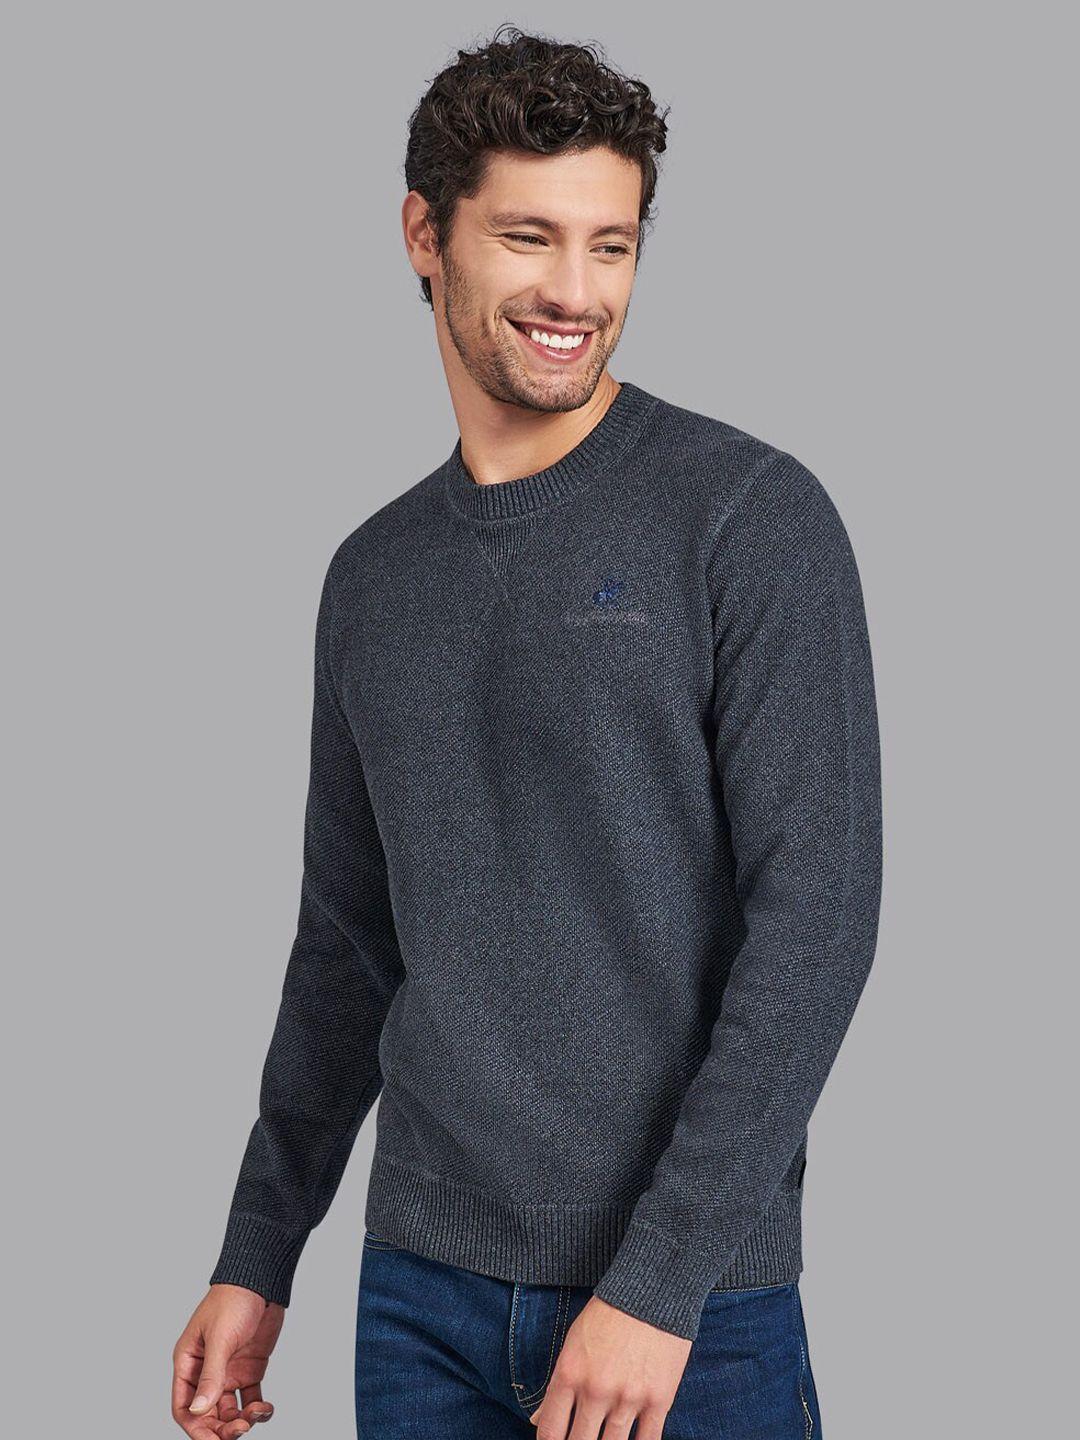 Beverly Hills Polo Club Men Charcoal Cotton Pullover